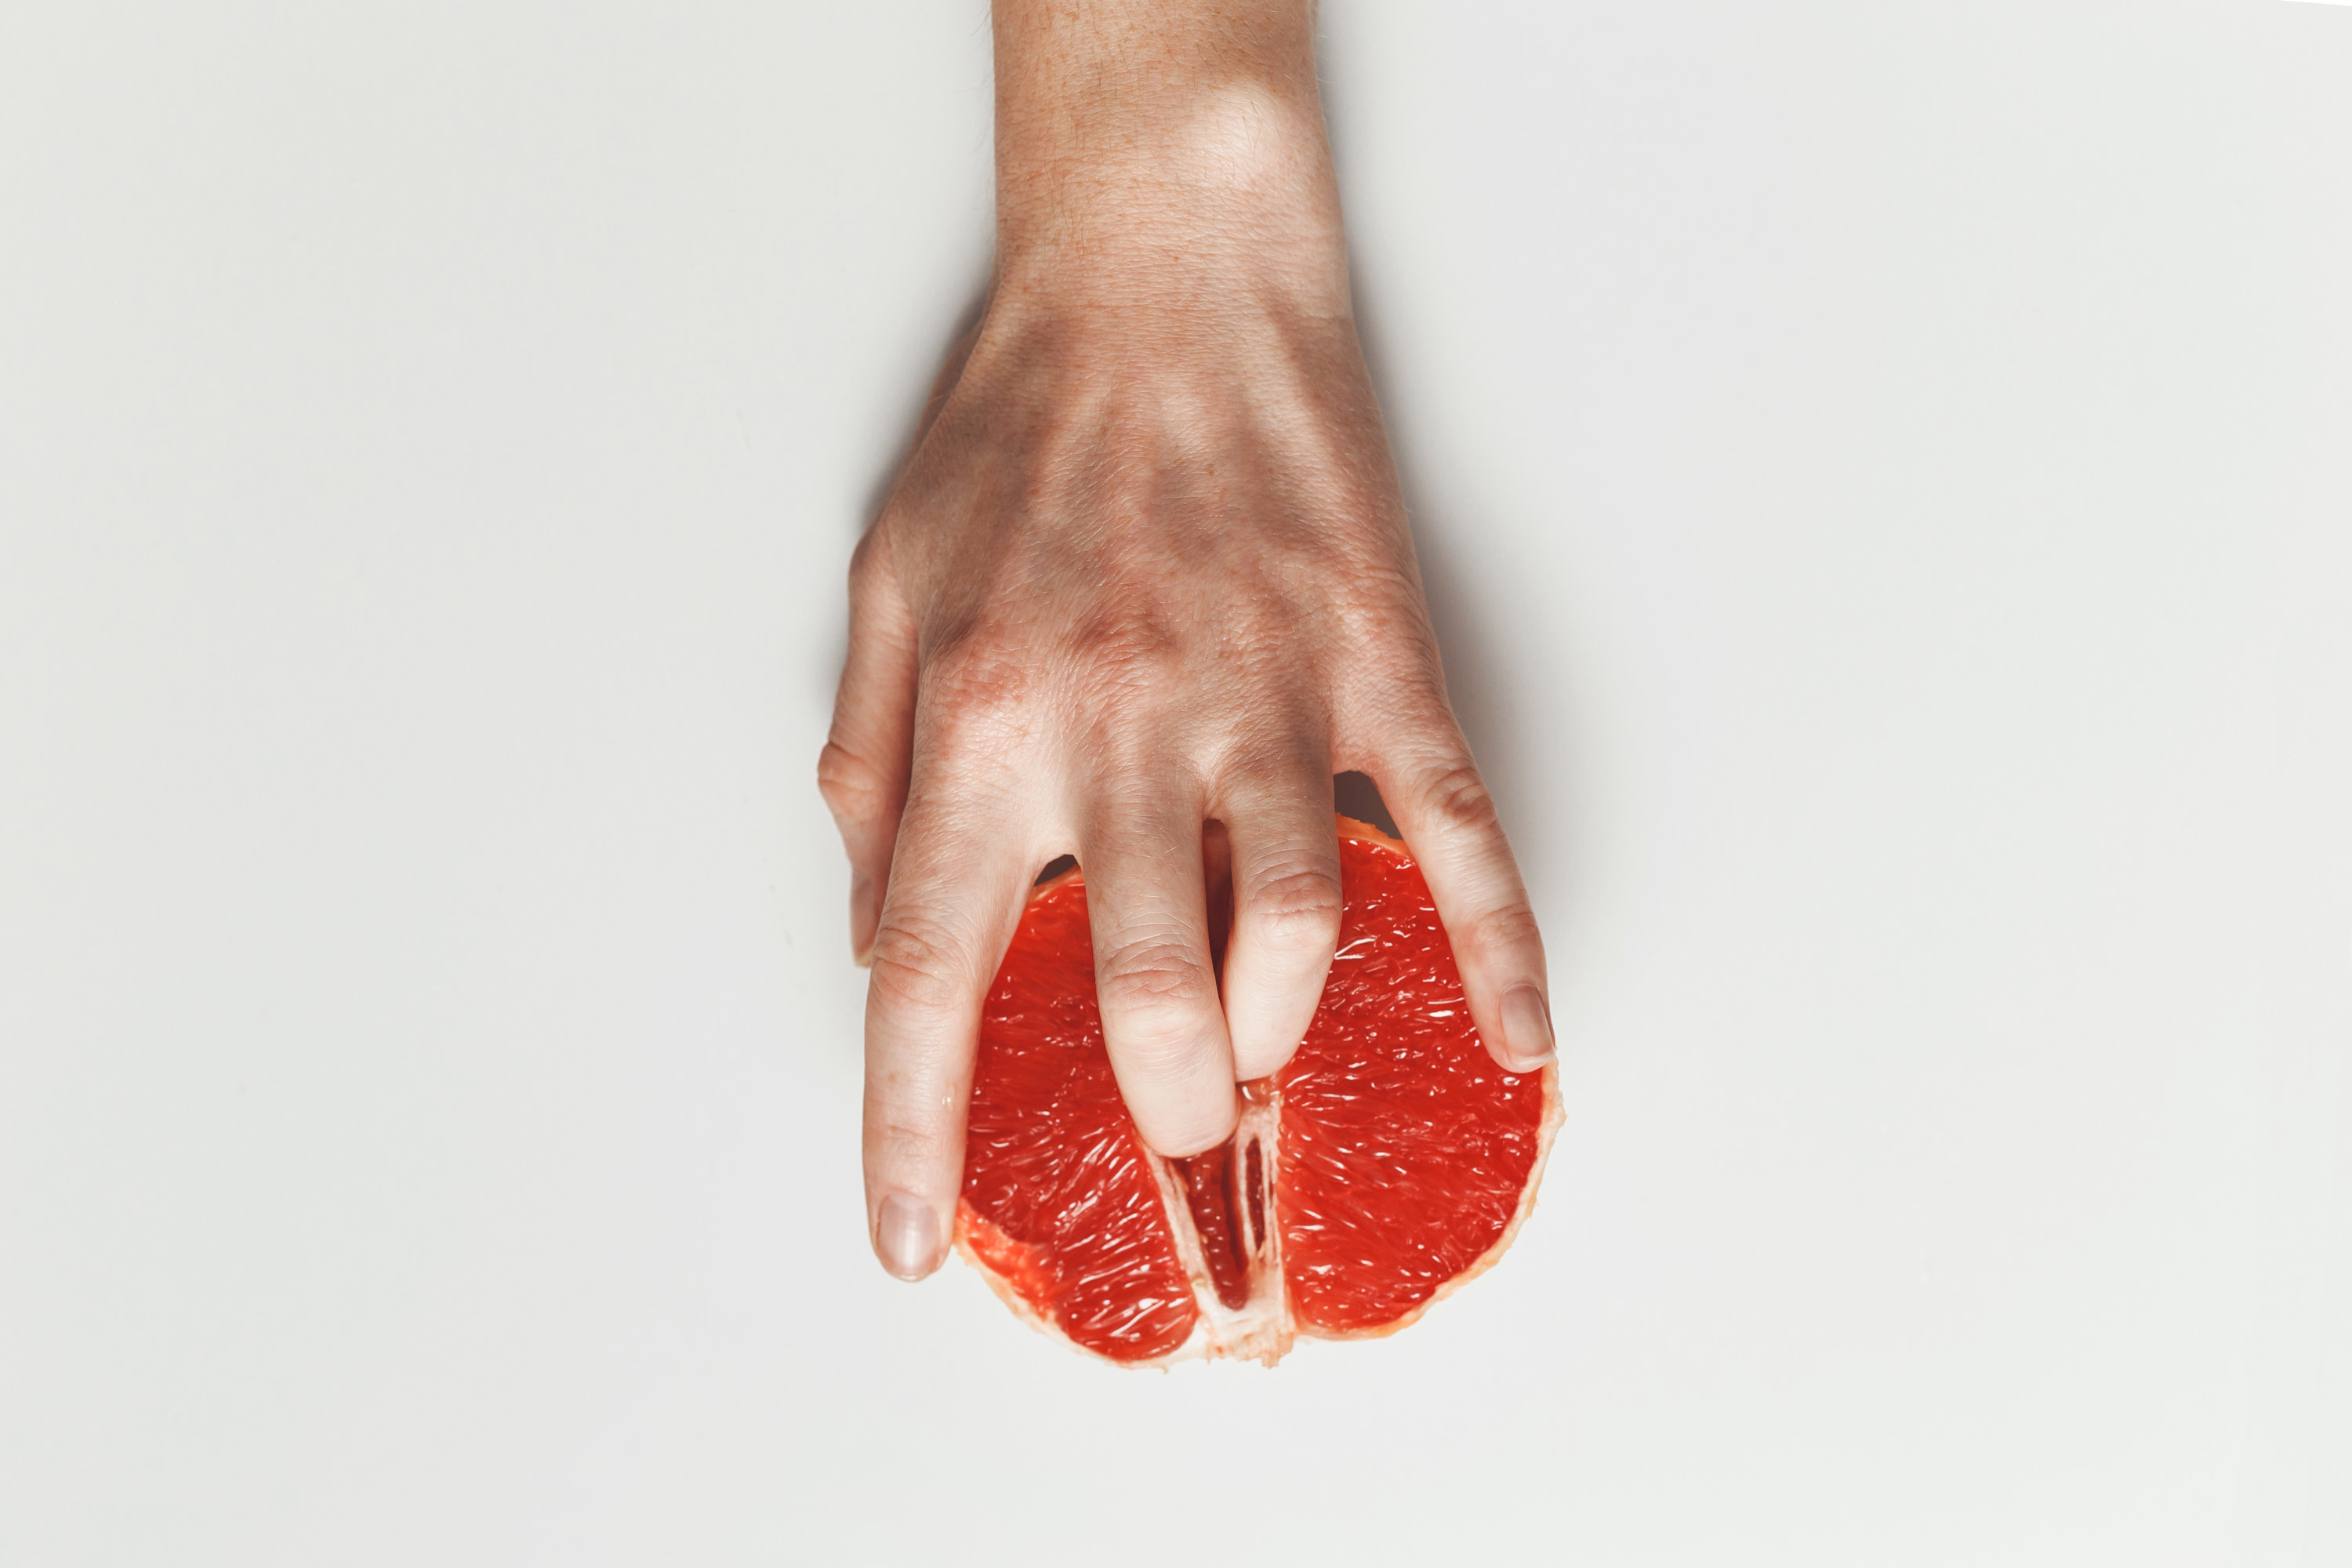 A human hand putting two fingers into a grapefruit on white background